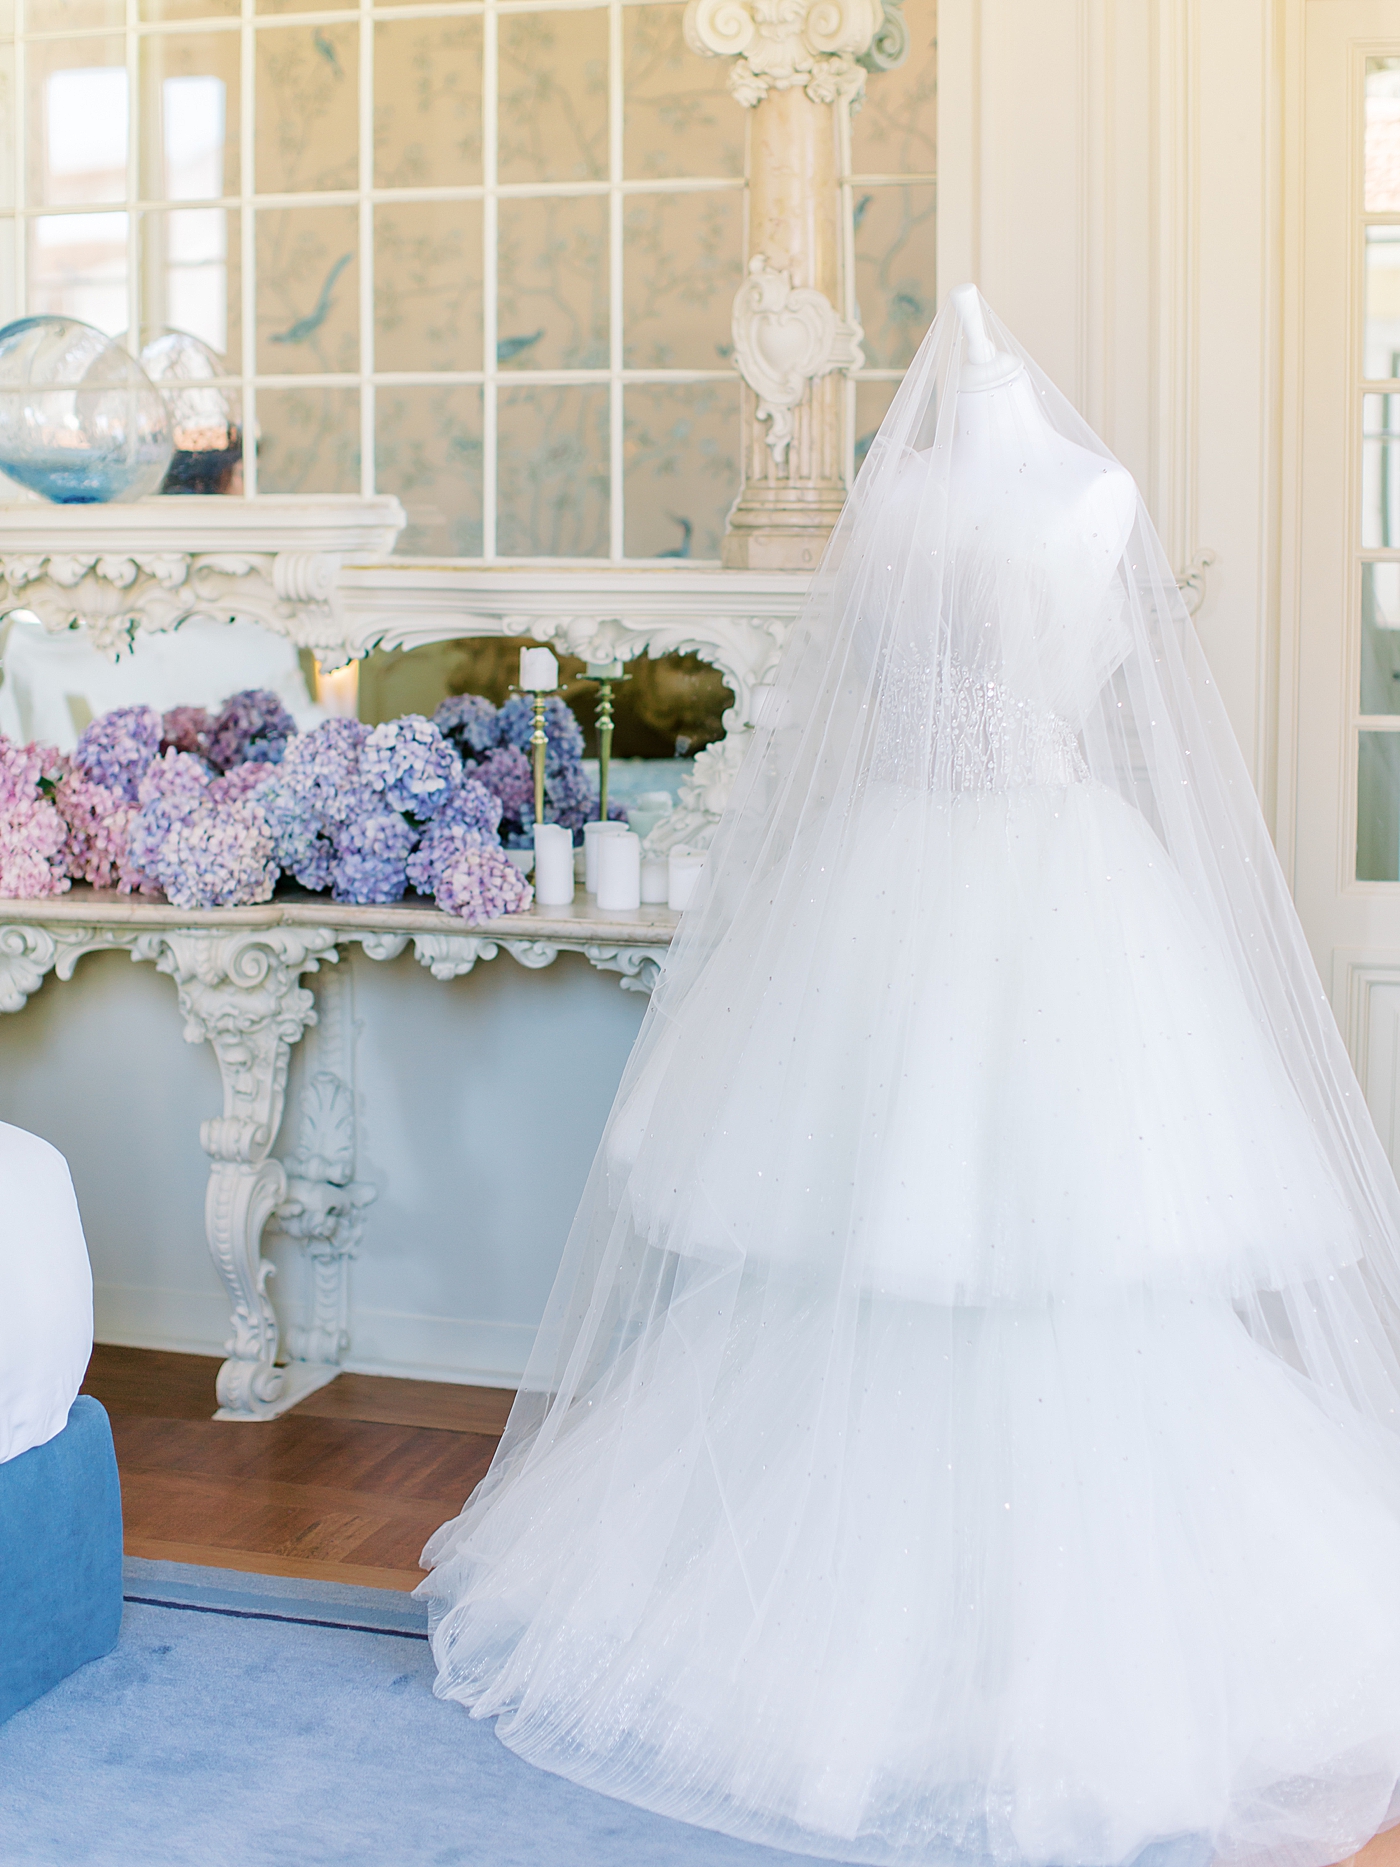 Couture bridal down on a mannequin in the bride's getting ready room | Image by Diane Sotero 